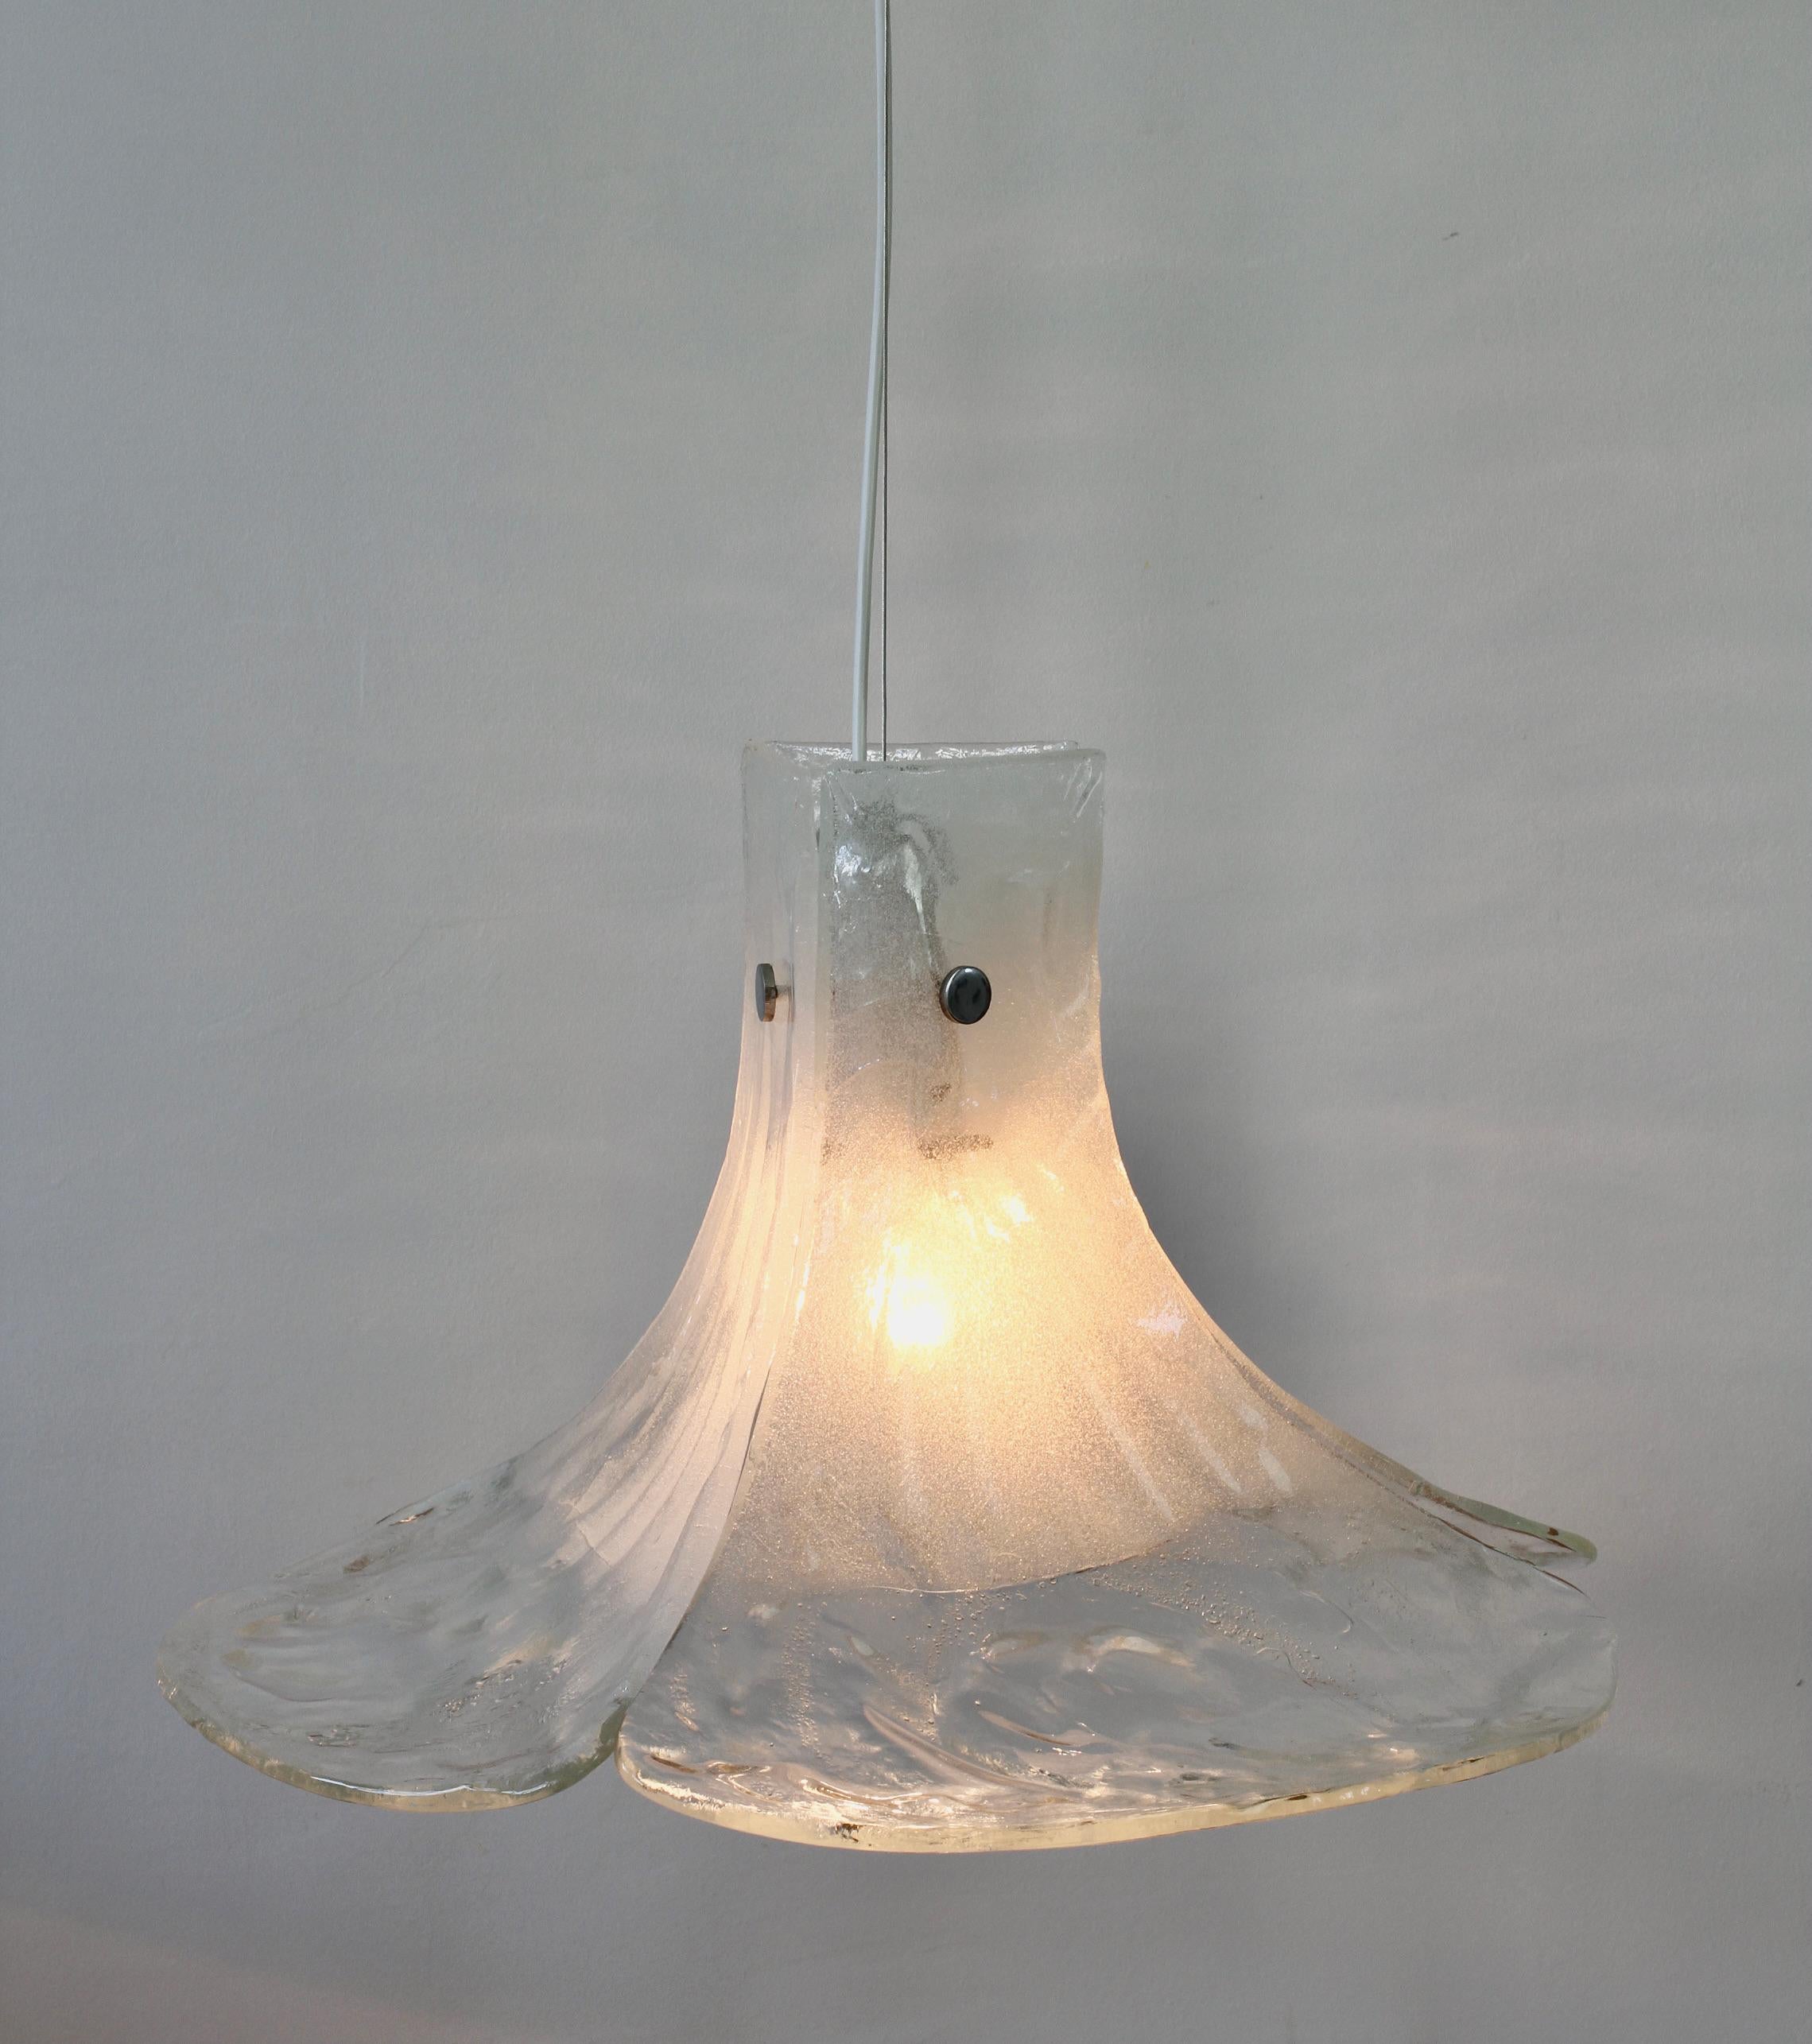 Large (61.5cm in diameter) vintage midcentury clear and. white bubble glass hanging pendant lamp or light fixture by Austrian lighting manufacturer Kalmar, circa late 1970s. Featuring three large curved flower petal shaped glass elements, made by